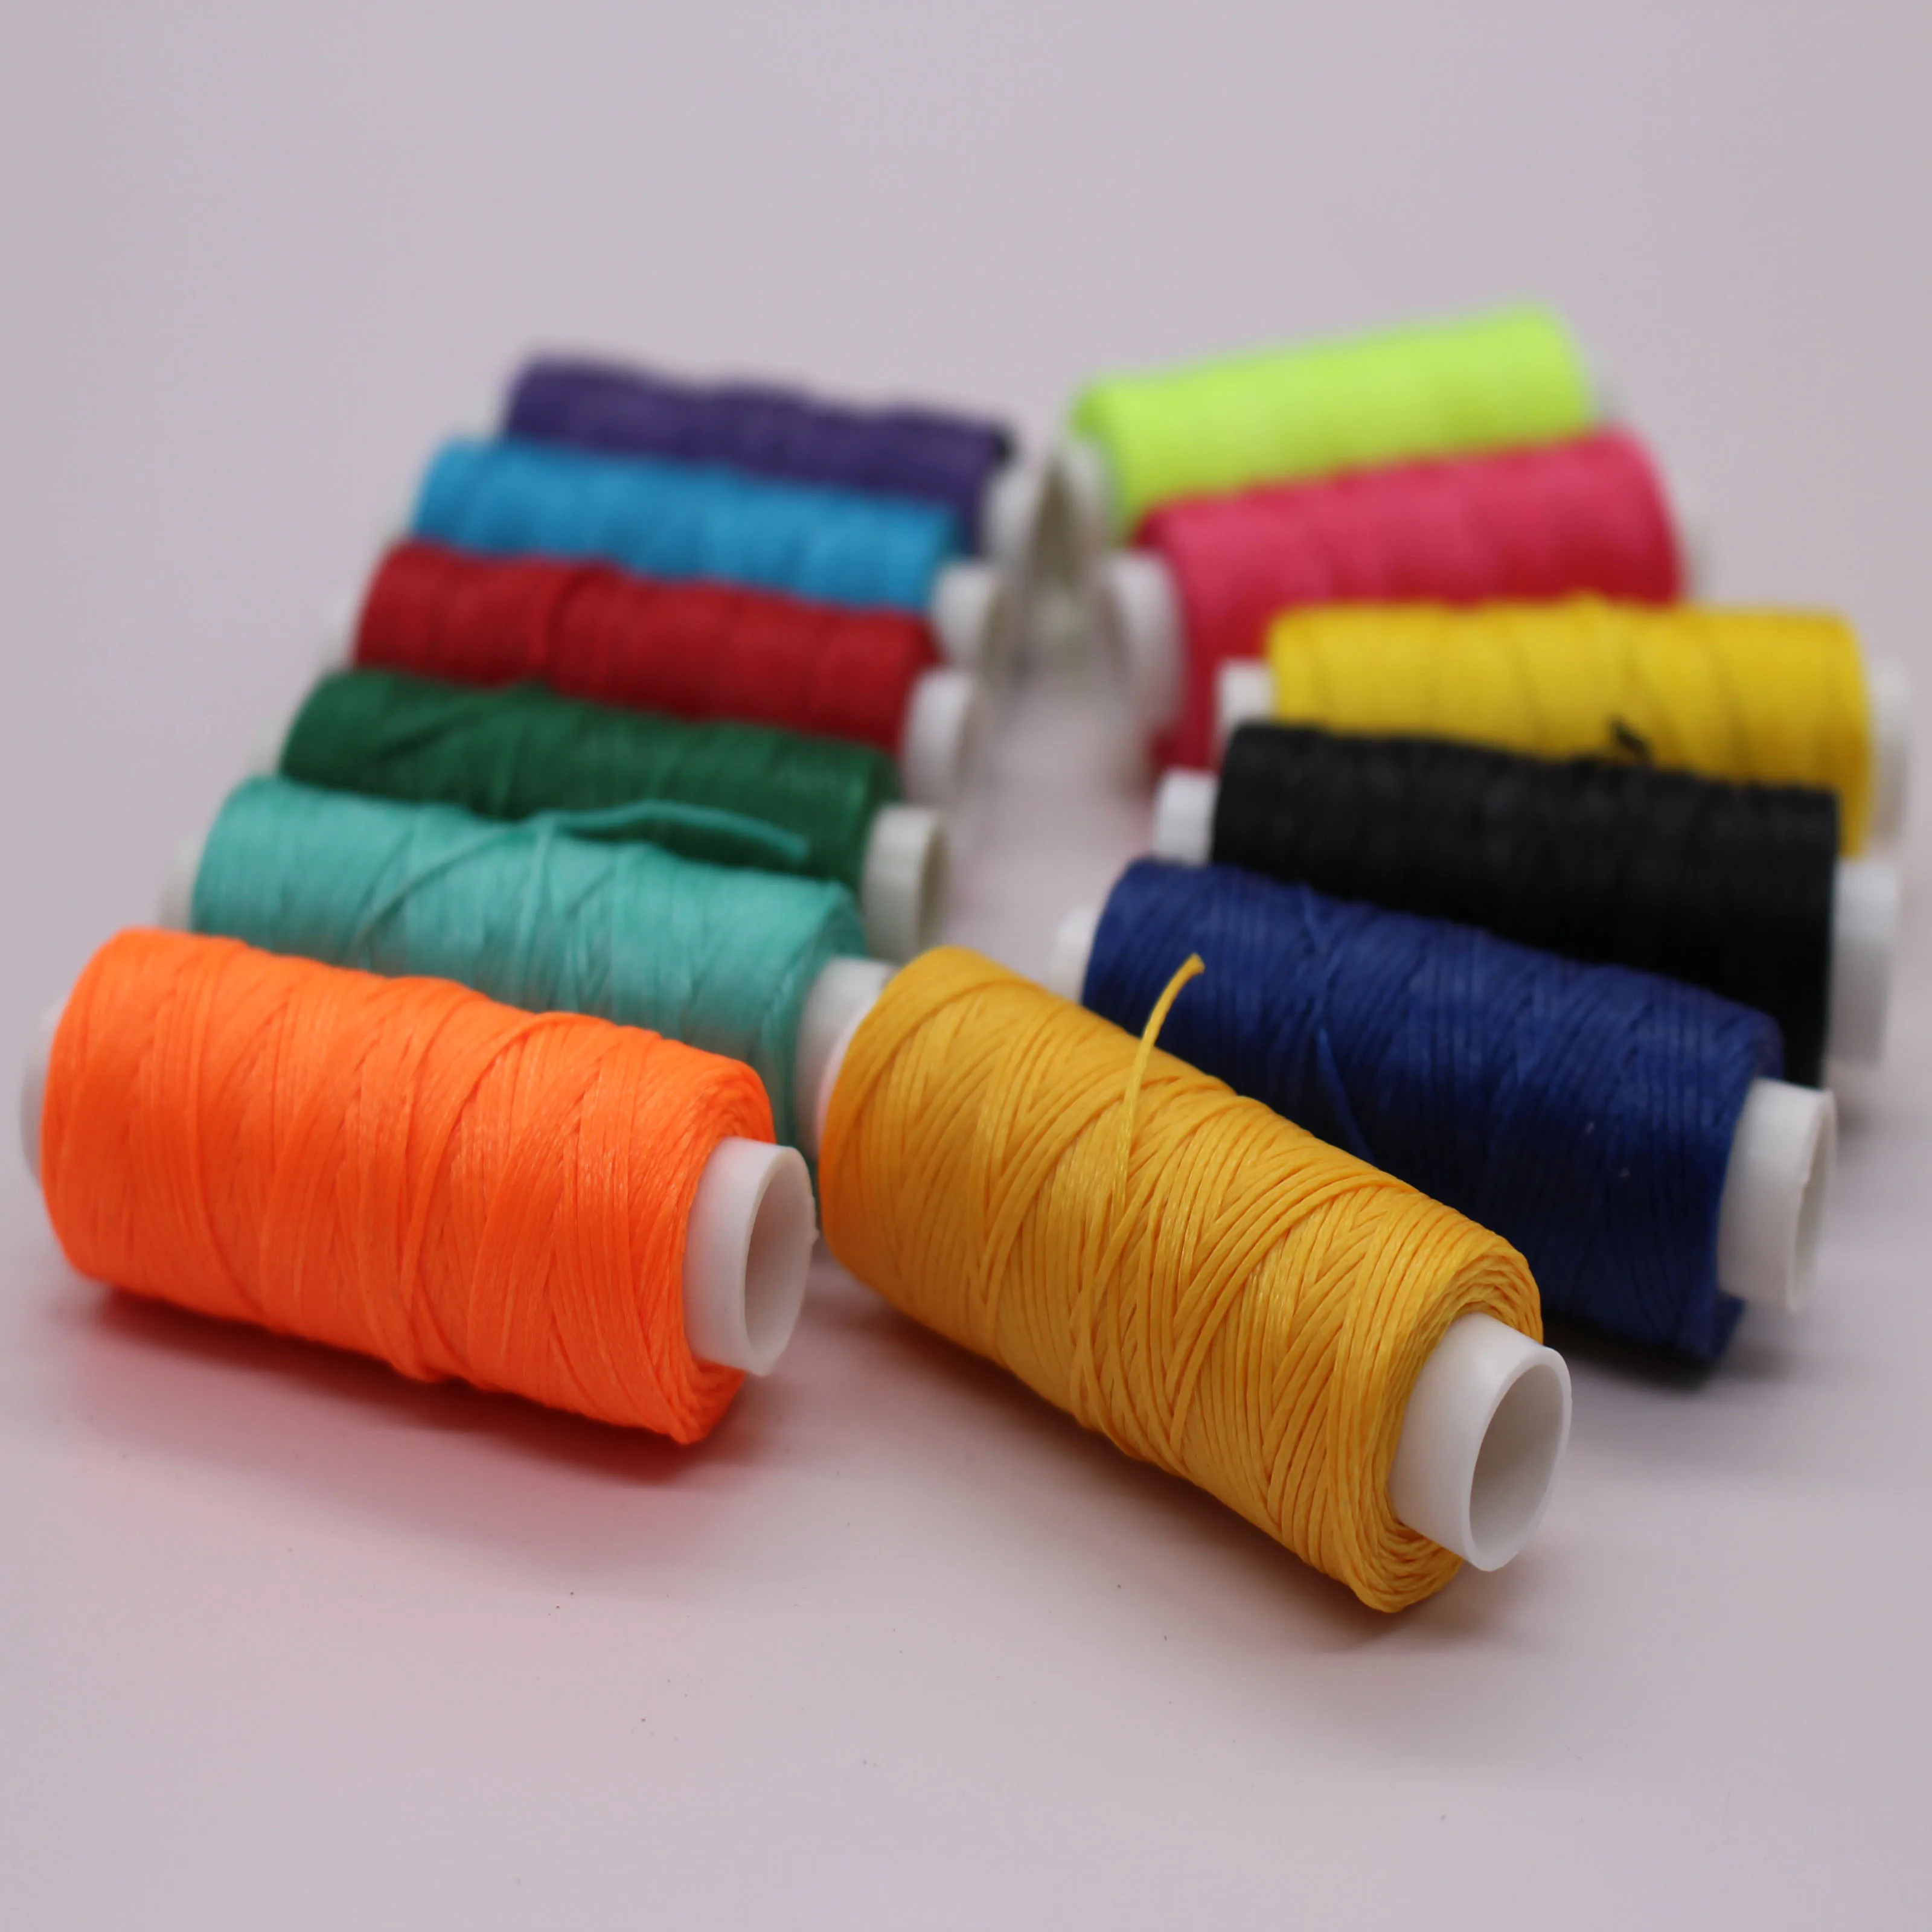 1.0mm waxed cords polyester leather sewing